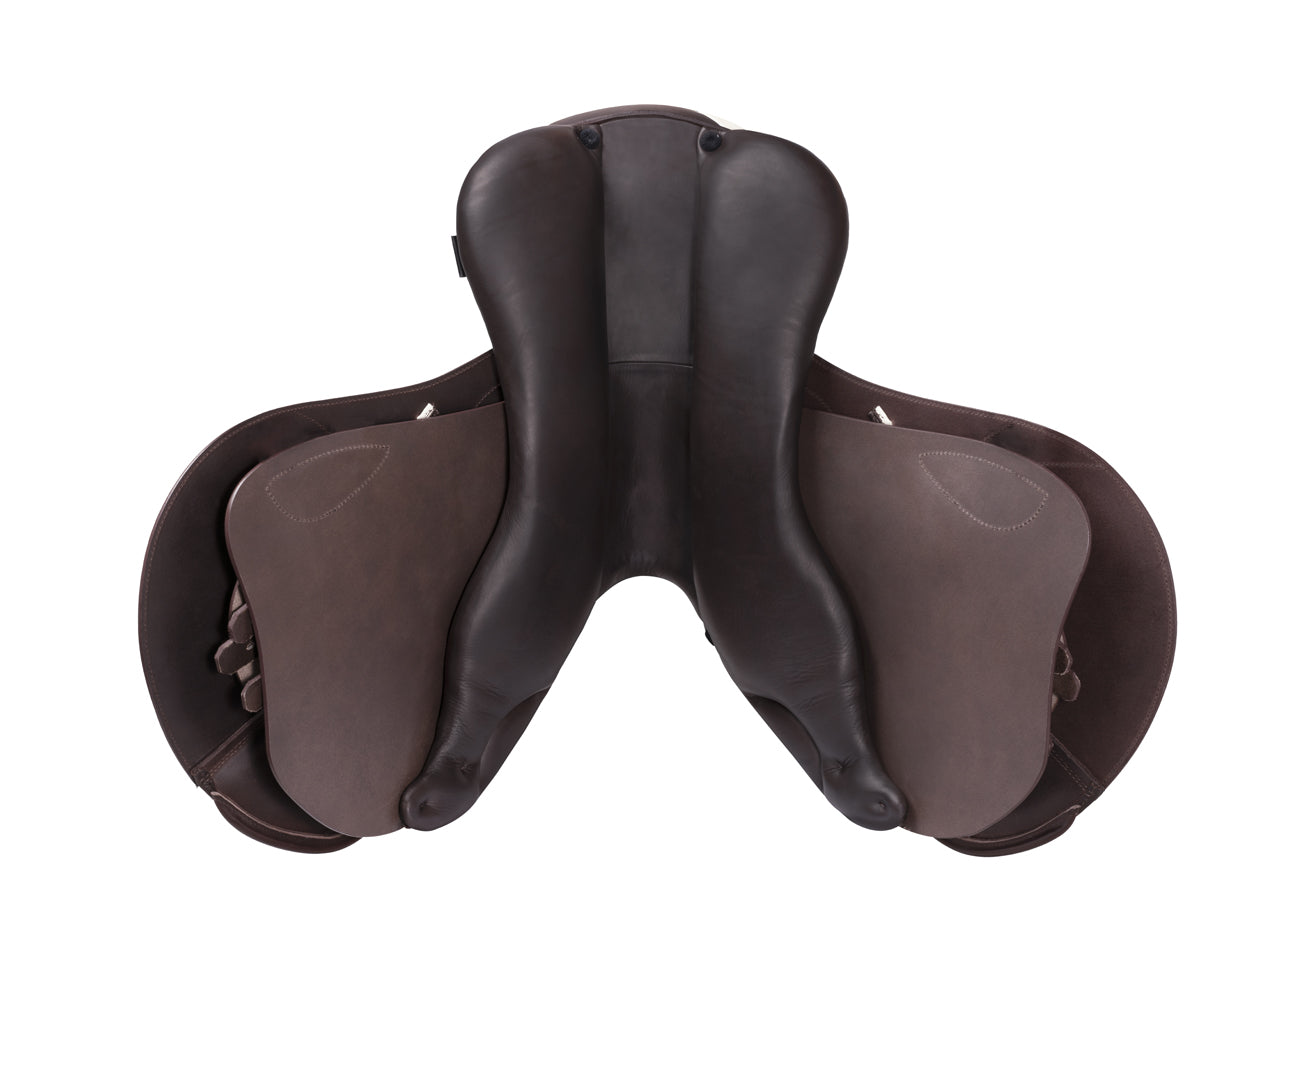 "A new generation of technology" Prestige Instinct CPS 1734 Jumping Saddle with SHOULDER FREE PANELS